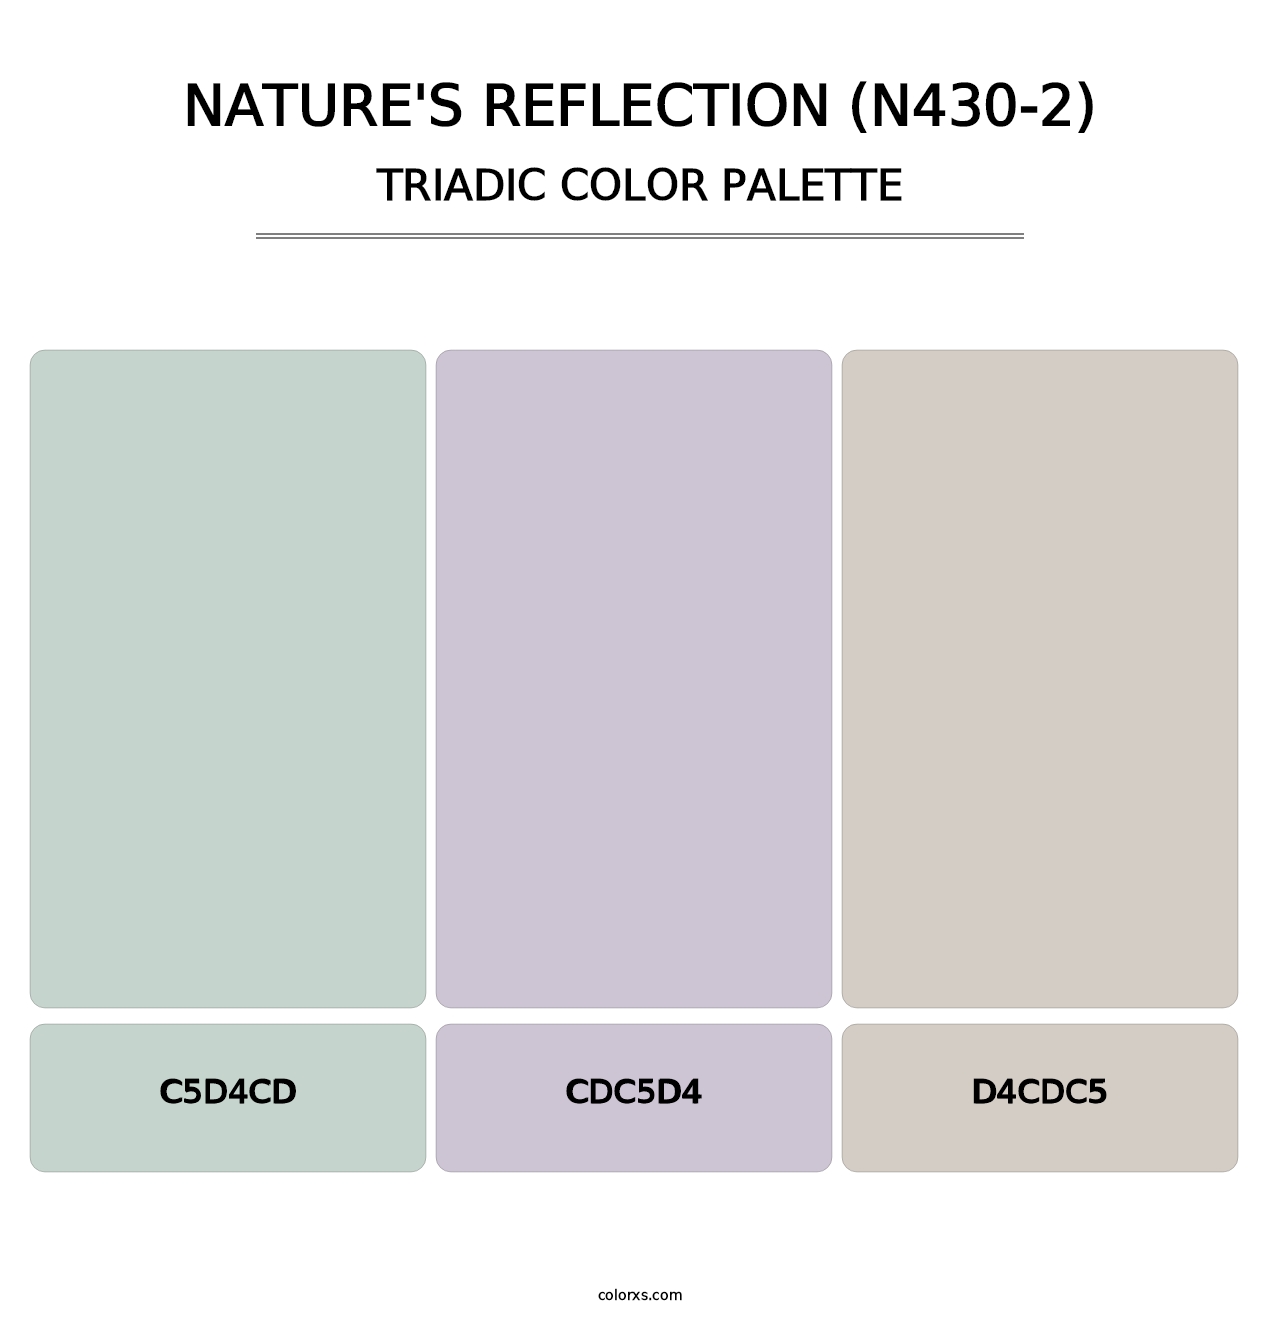 Nature'S Reflection (N430-2) - Triadic Color Palette